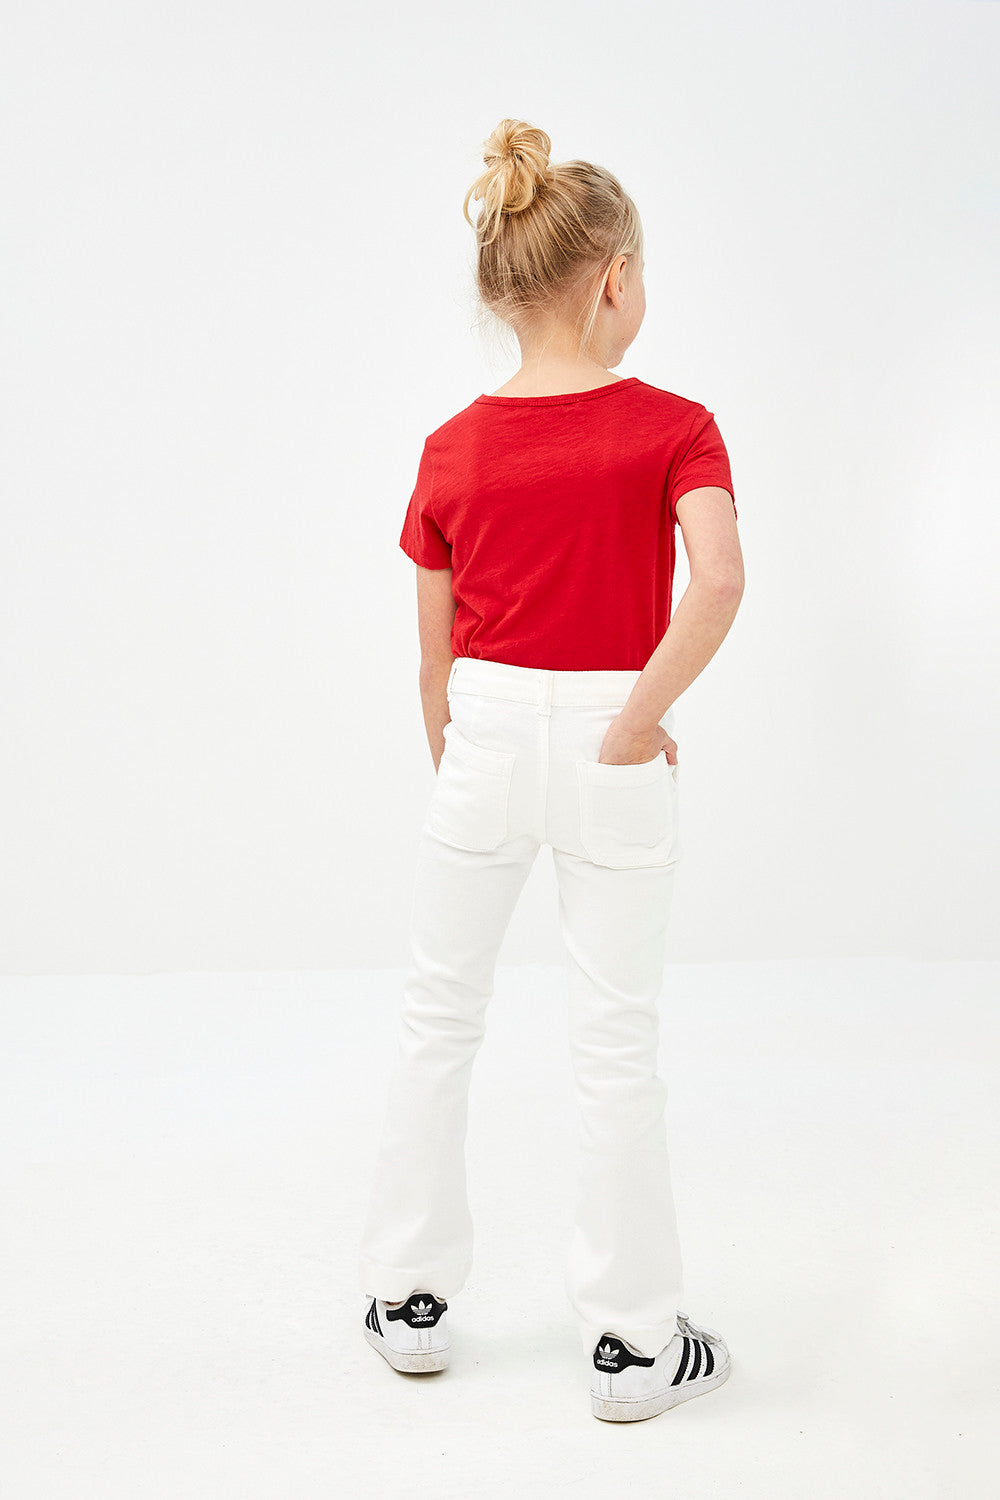 By-Bar Girls Leila Pant off-white